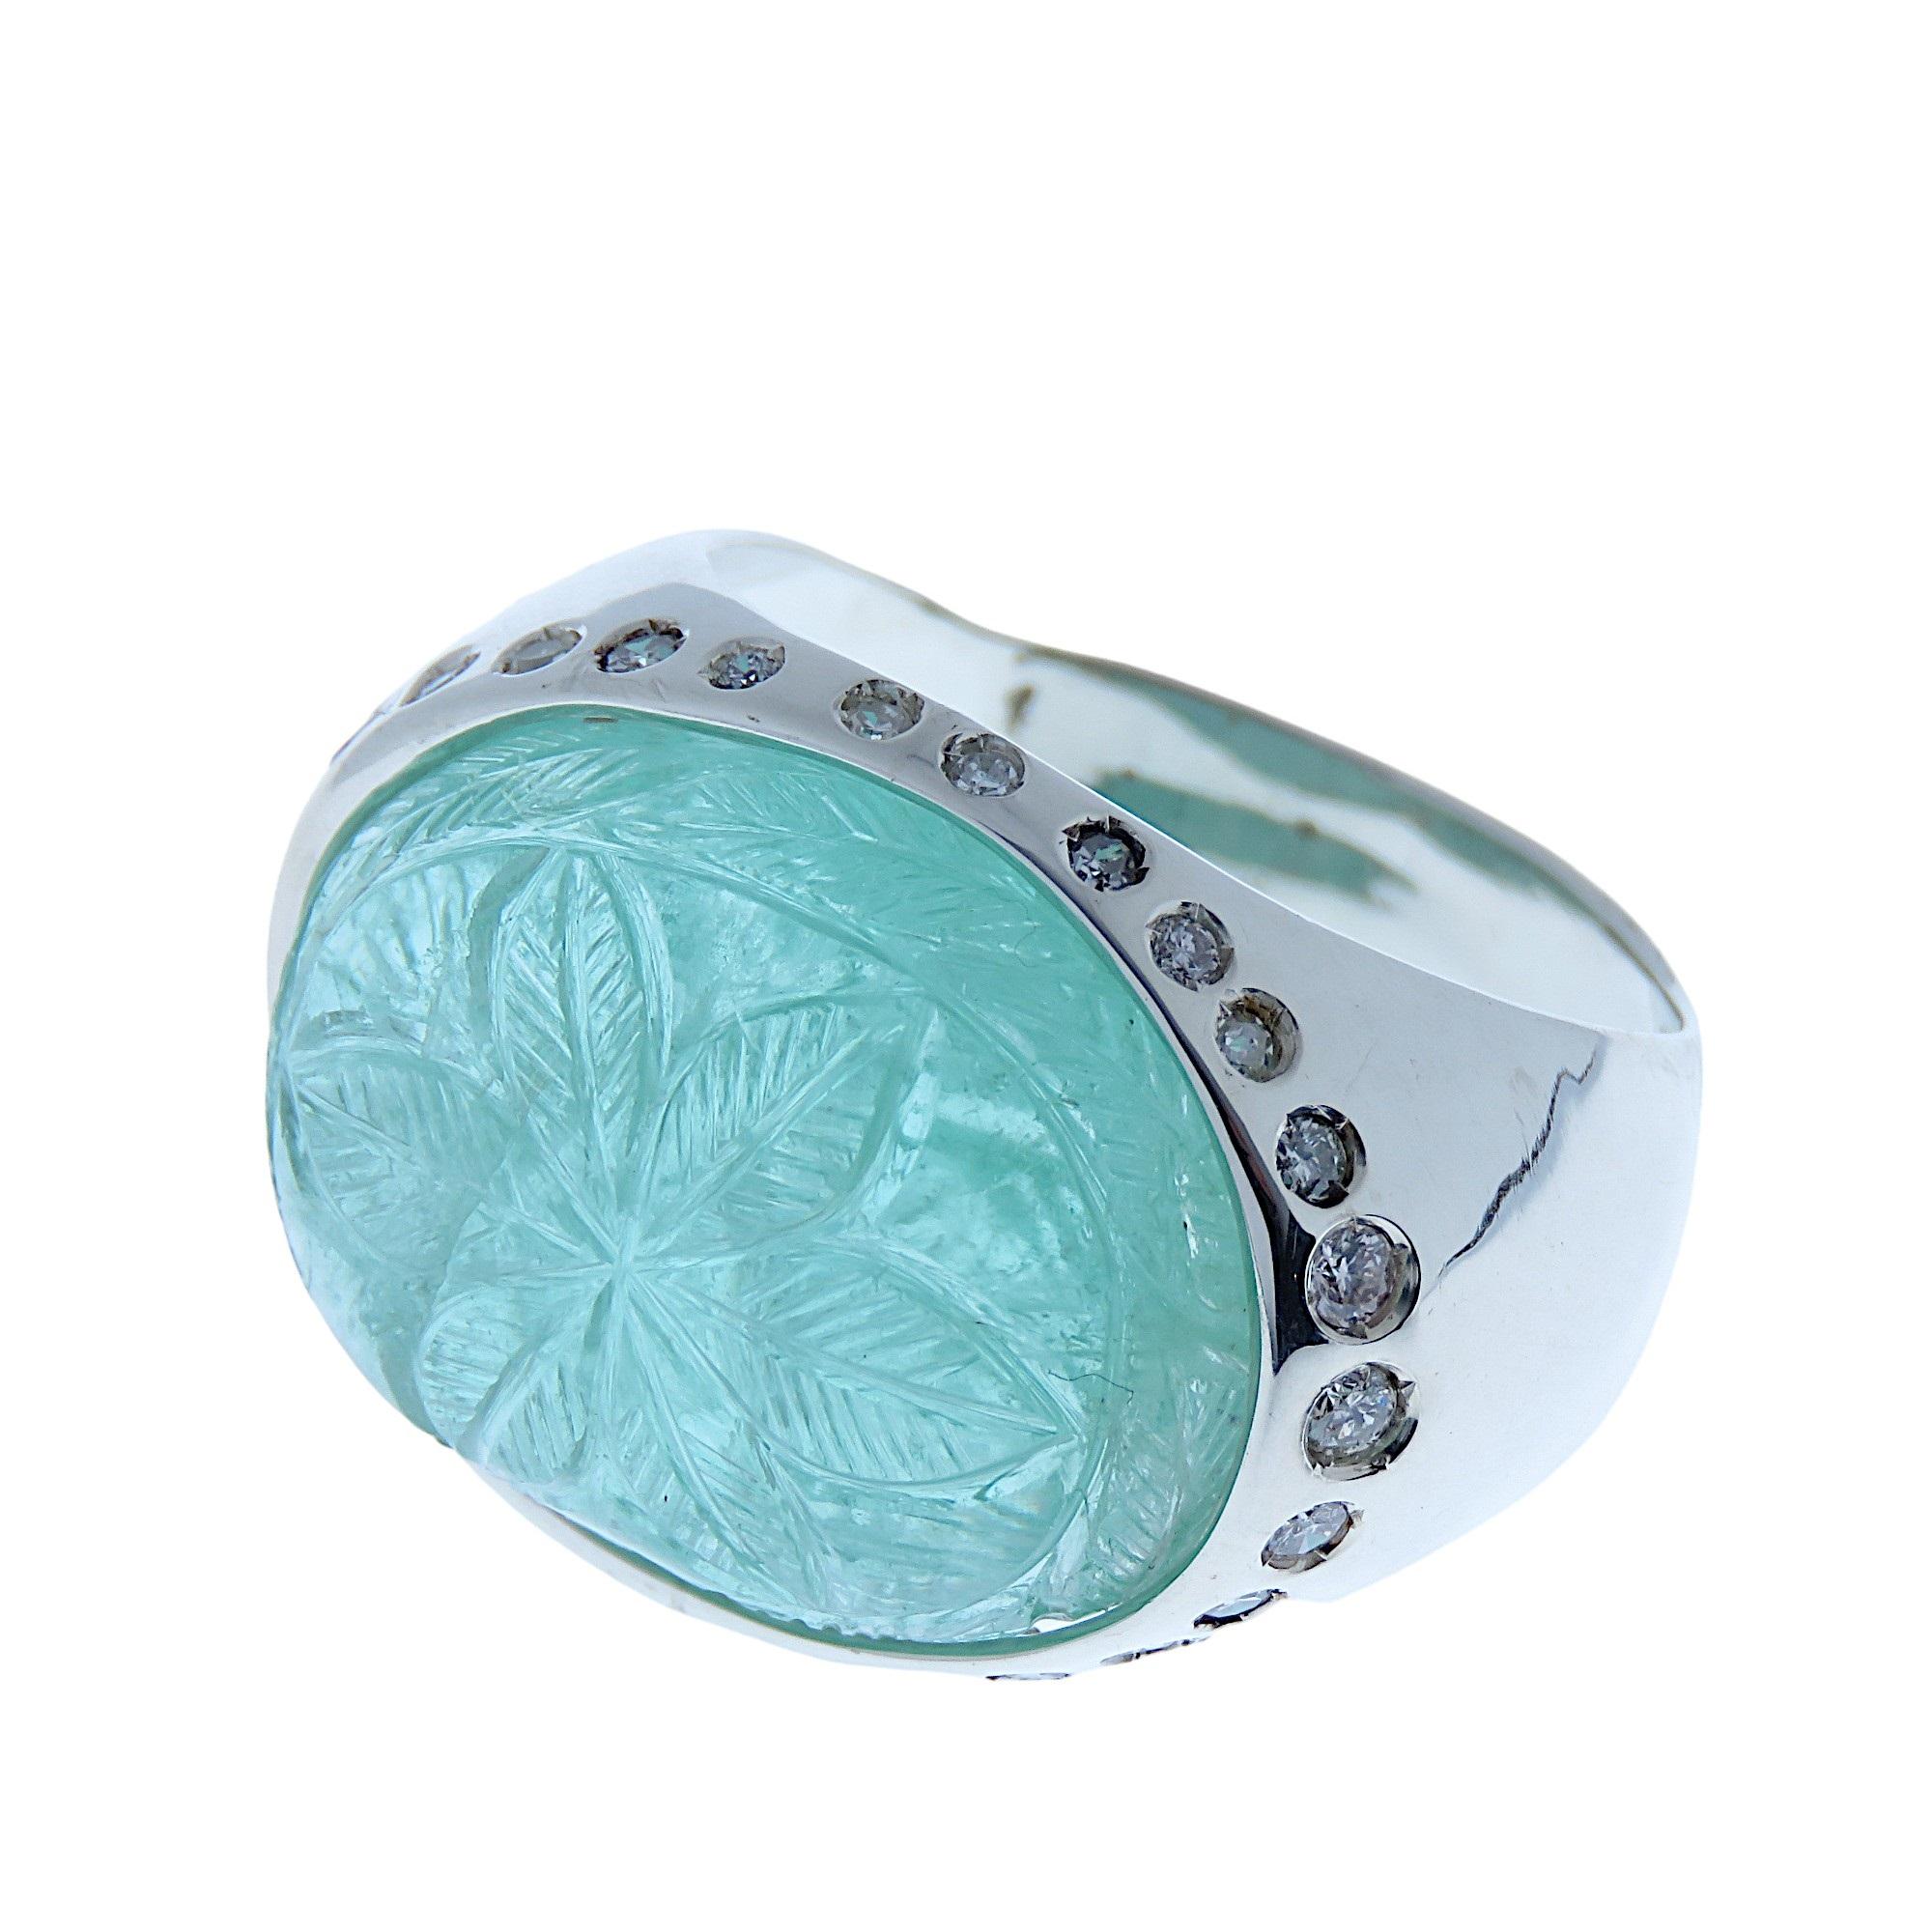 Dome ring showcasing an extraordinary carved emerald with floral motifs set in 9 karat white gold with 26 brilliant cut white diamonds. US finger size is 8 , French size 57, Italian size 17, the ring can be resized to the customer's size before